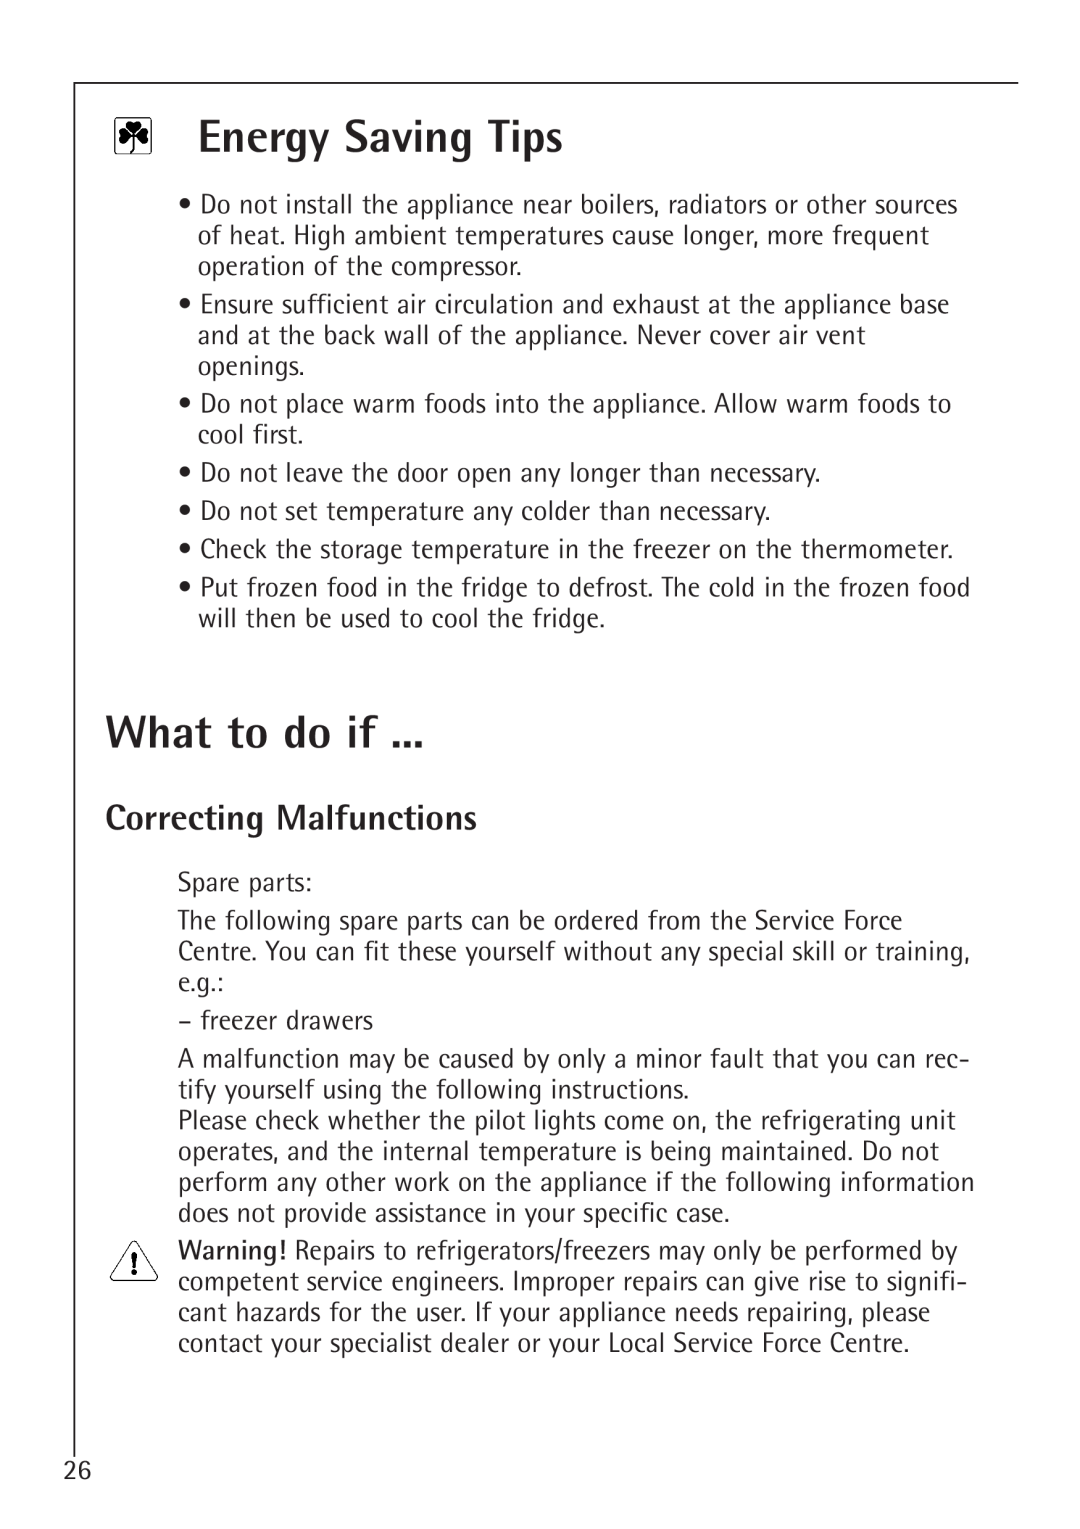 Electrolux 66050i installation instructions Energy Saving Tips, What to do if, Correcting Malfunctions 